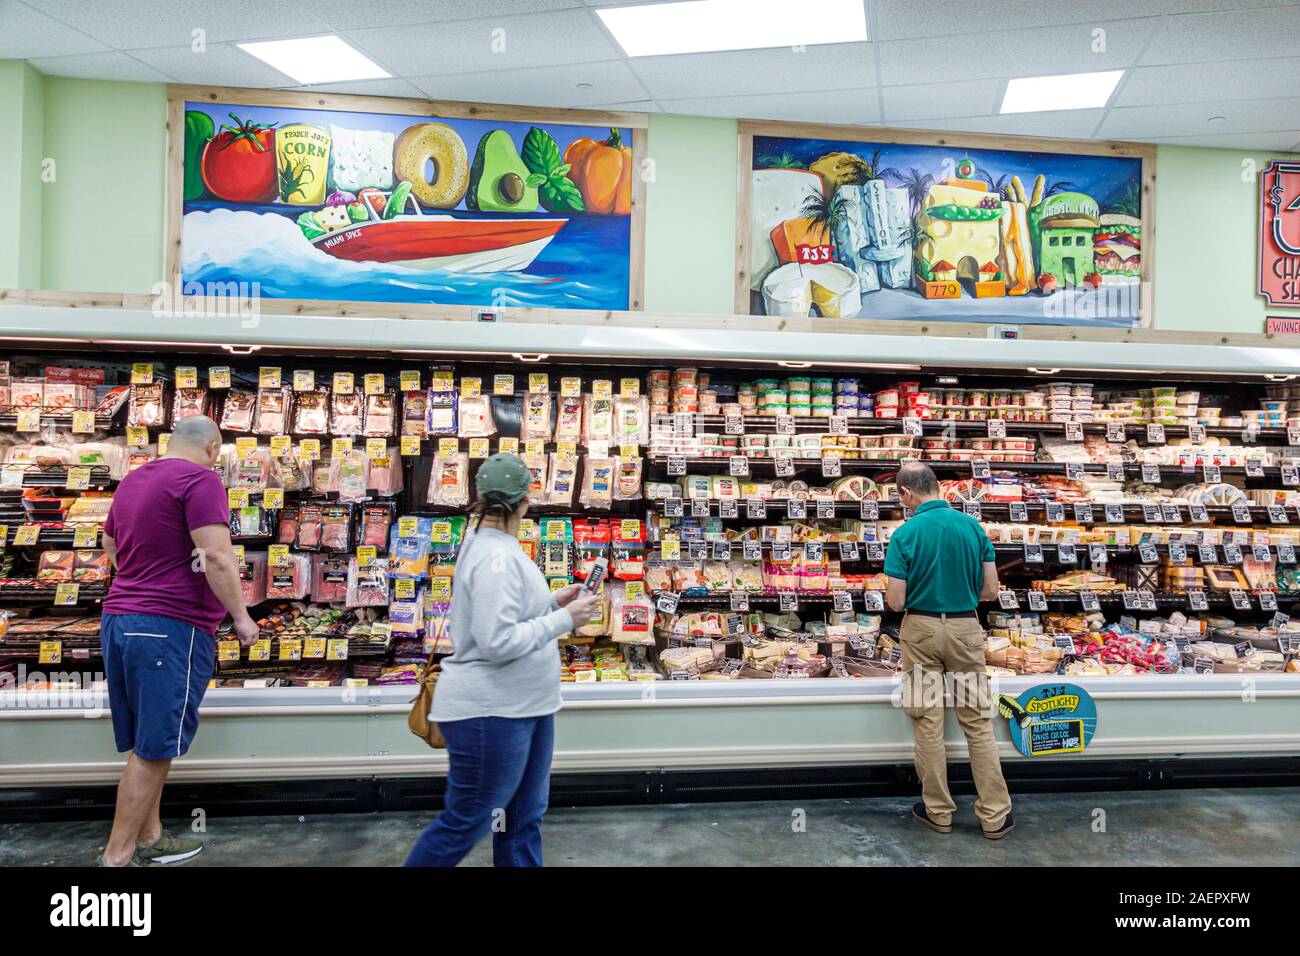 Miami Beach Florida,Trader Joe's,grocery store supermarket food,shopping,interior inside,deli,cheese,cold cuts,refrigerated case,woman,man,display sal Stock Photo